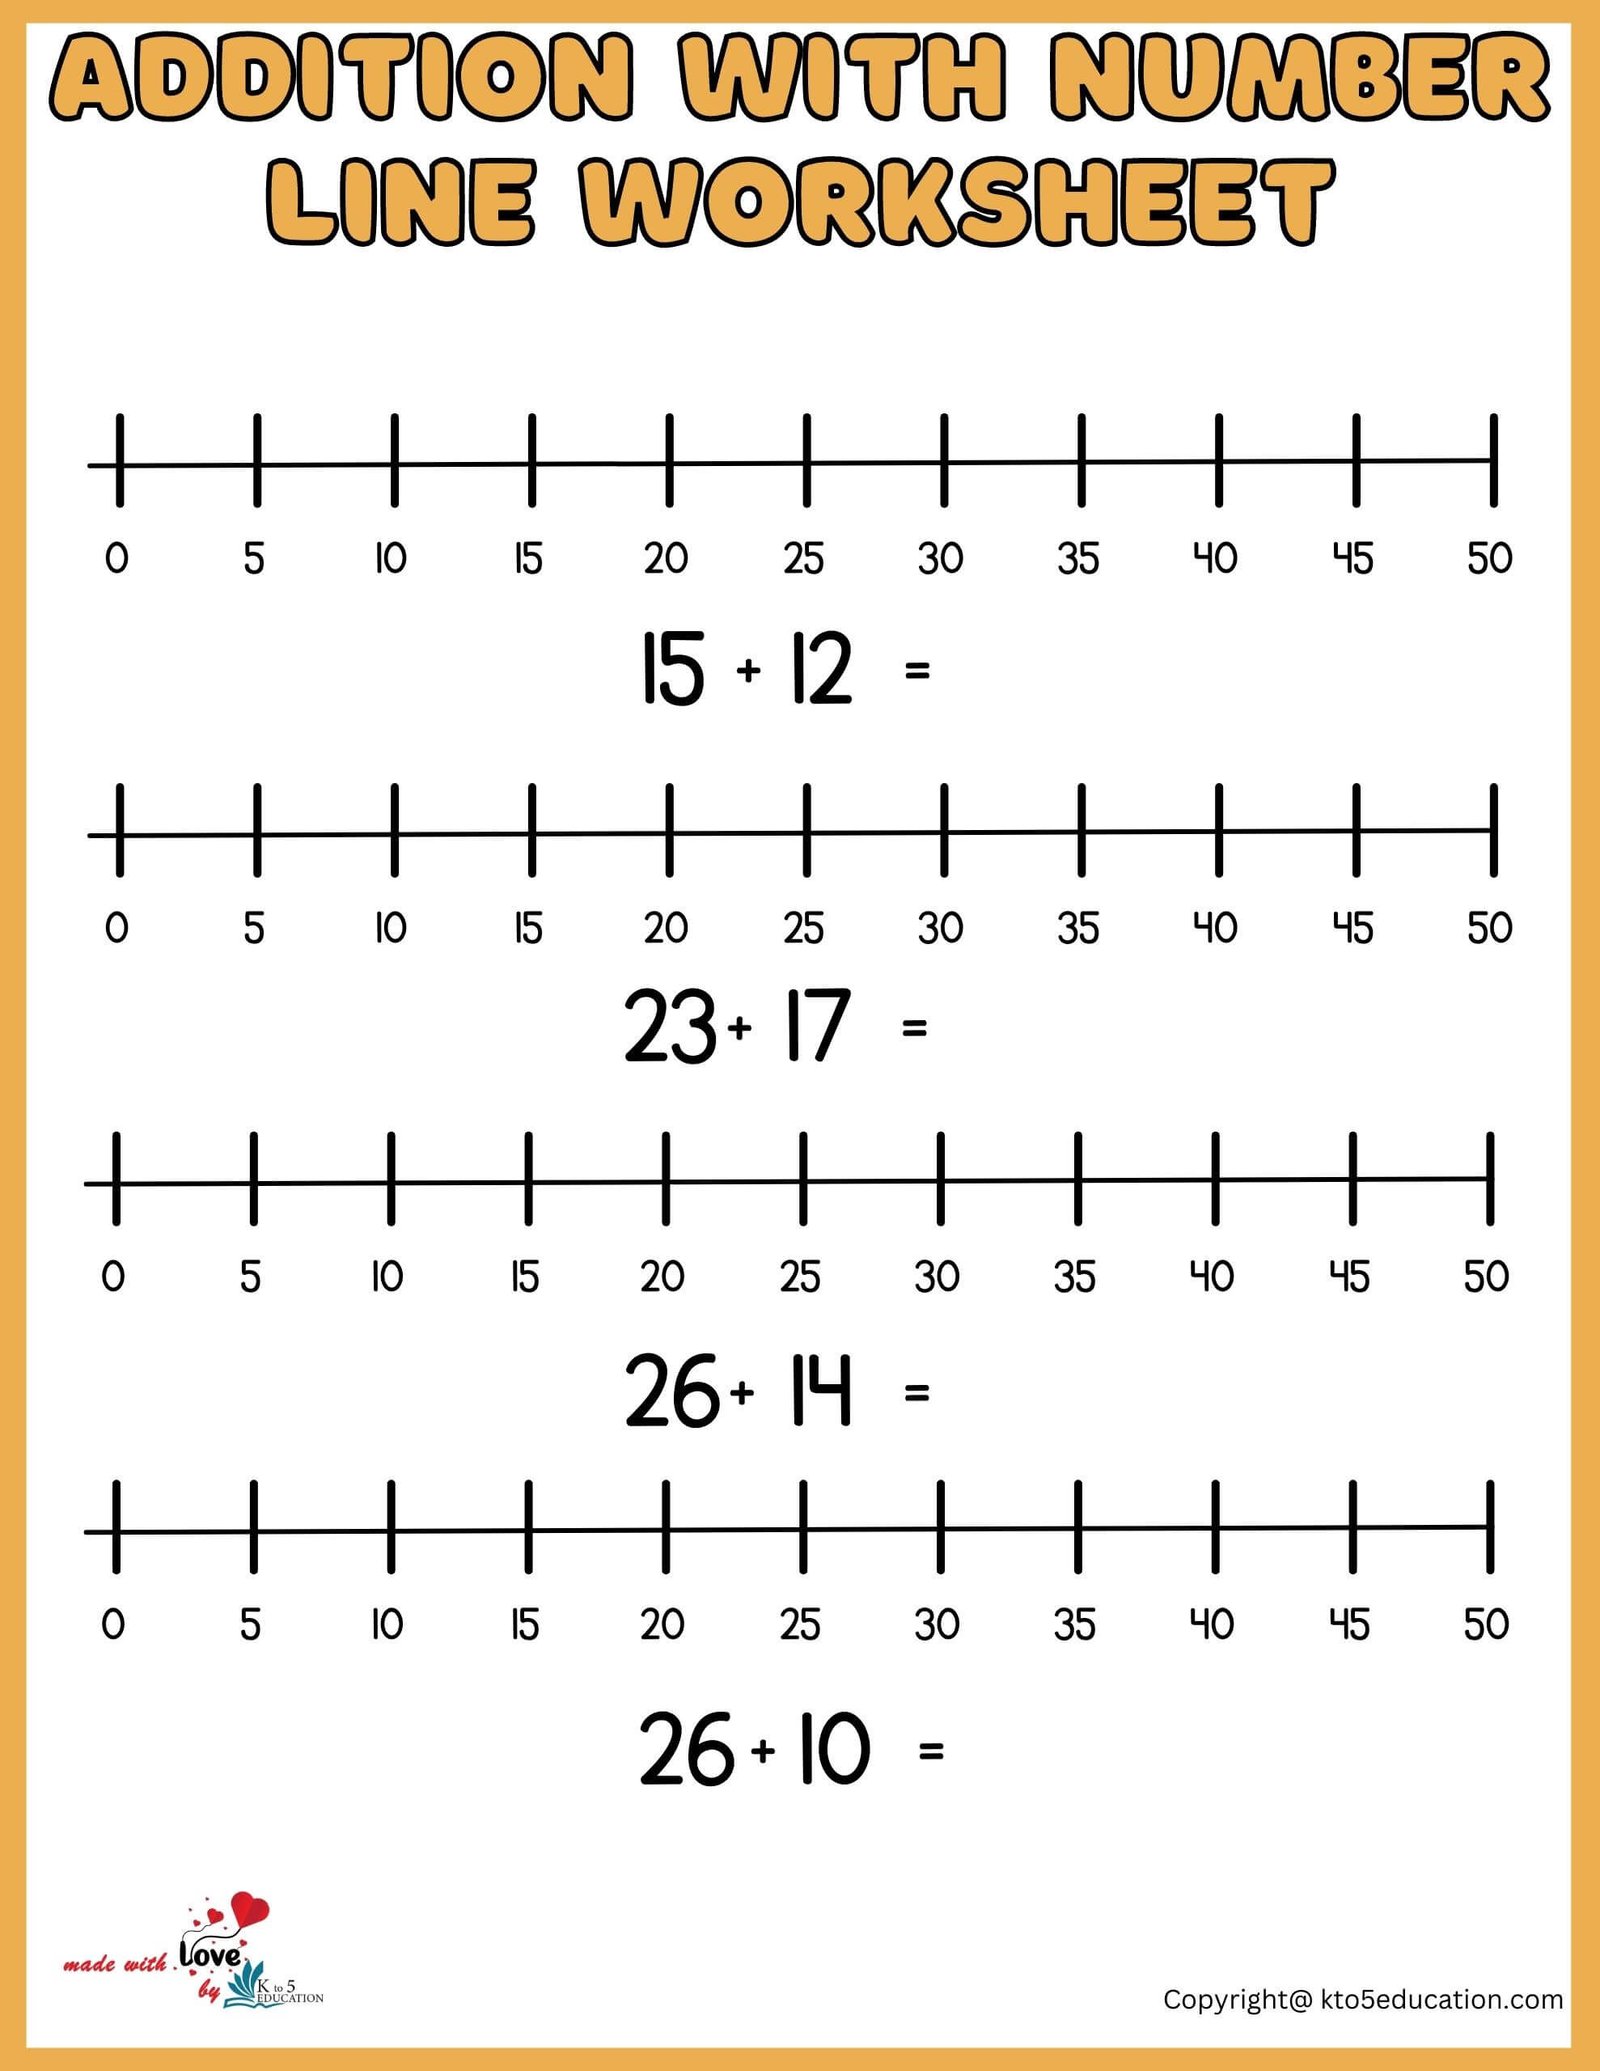 Free Addition With Number Line Worksheet 1-50